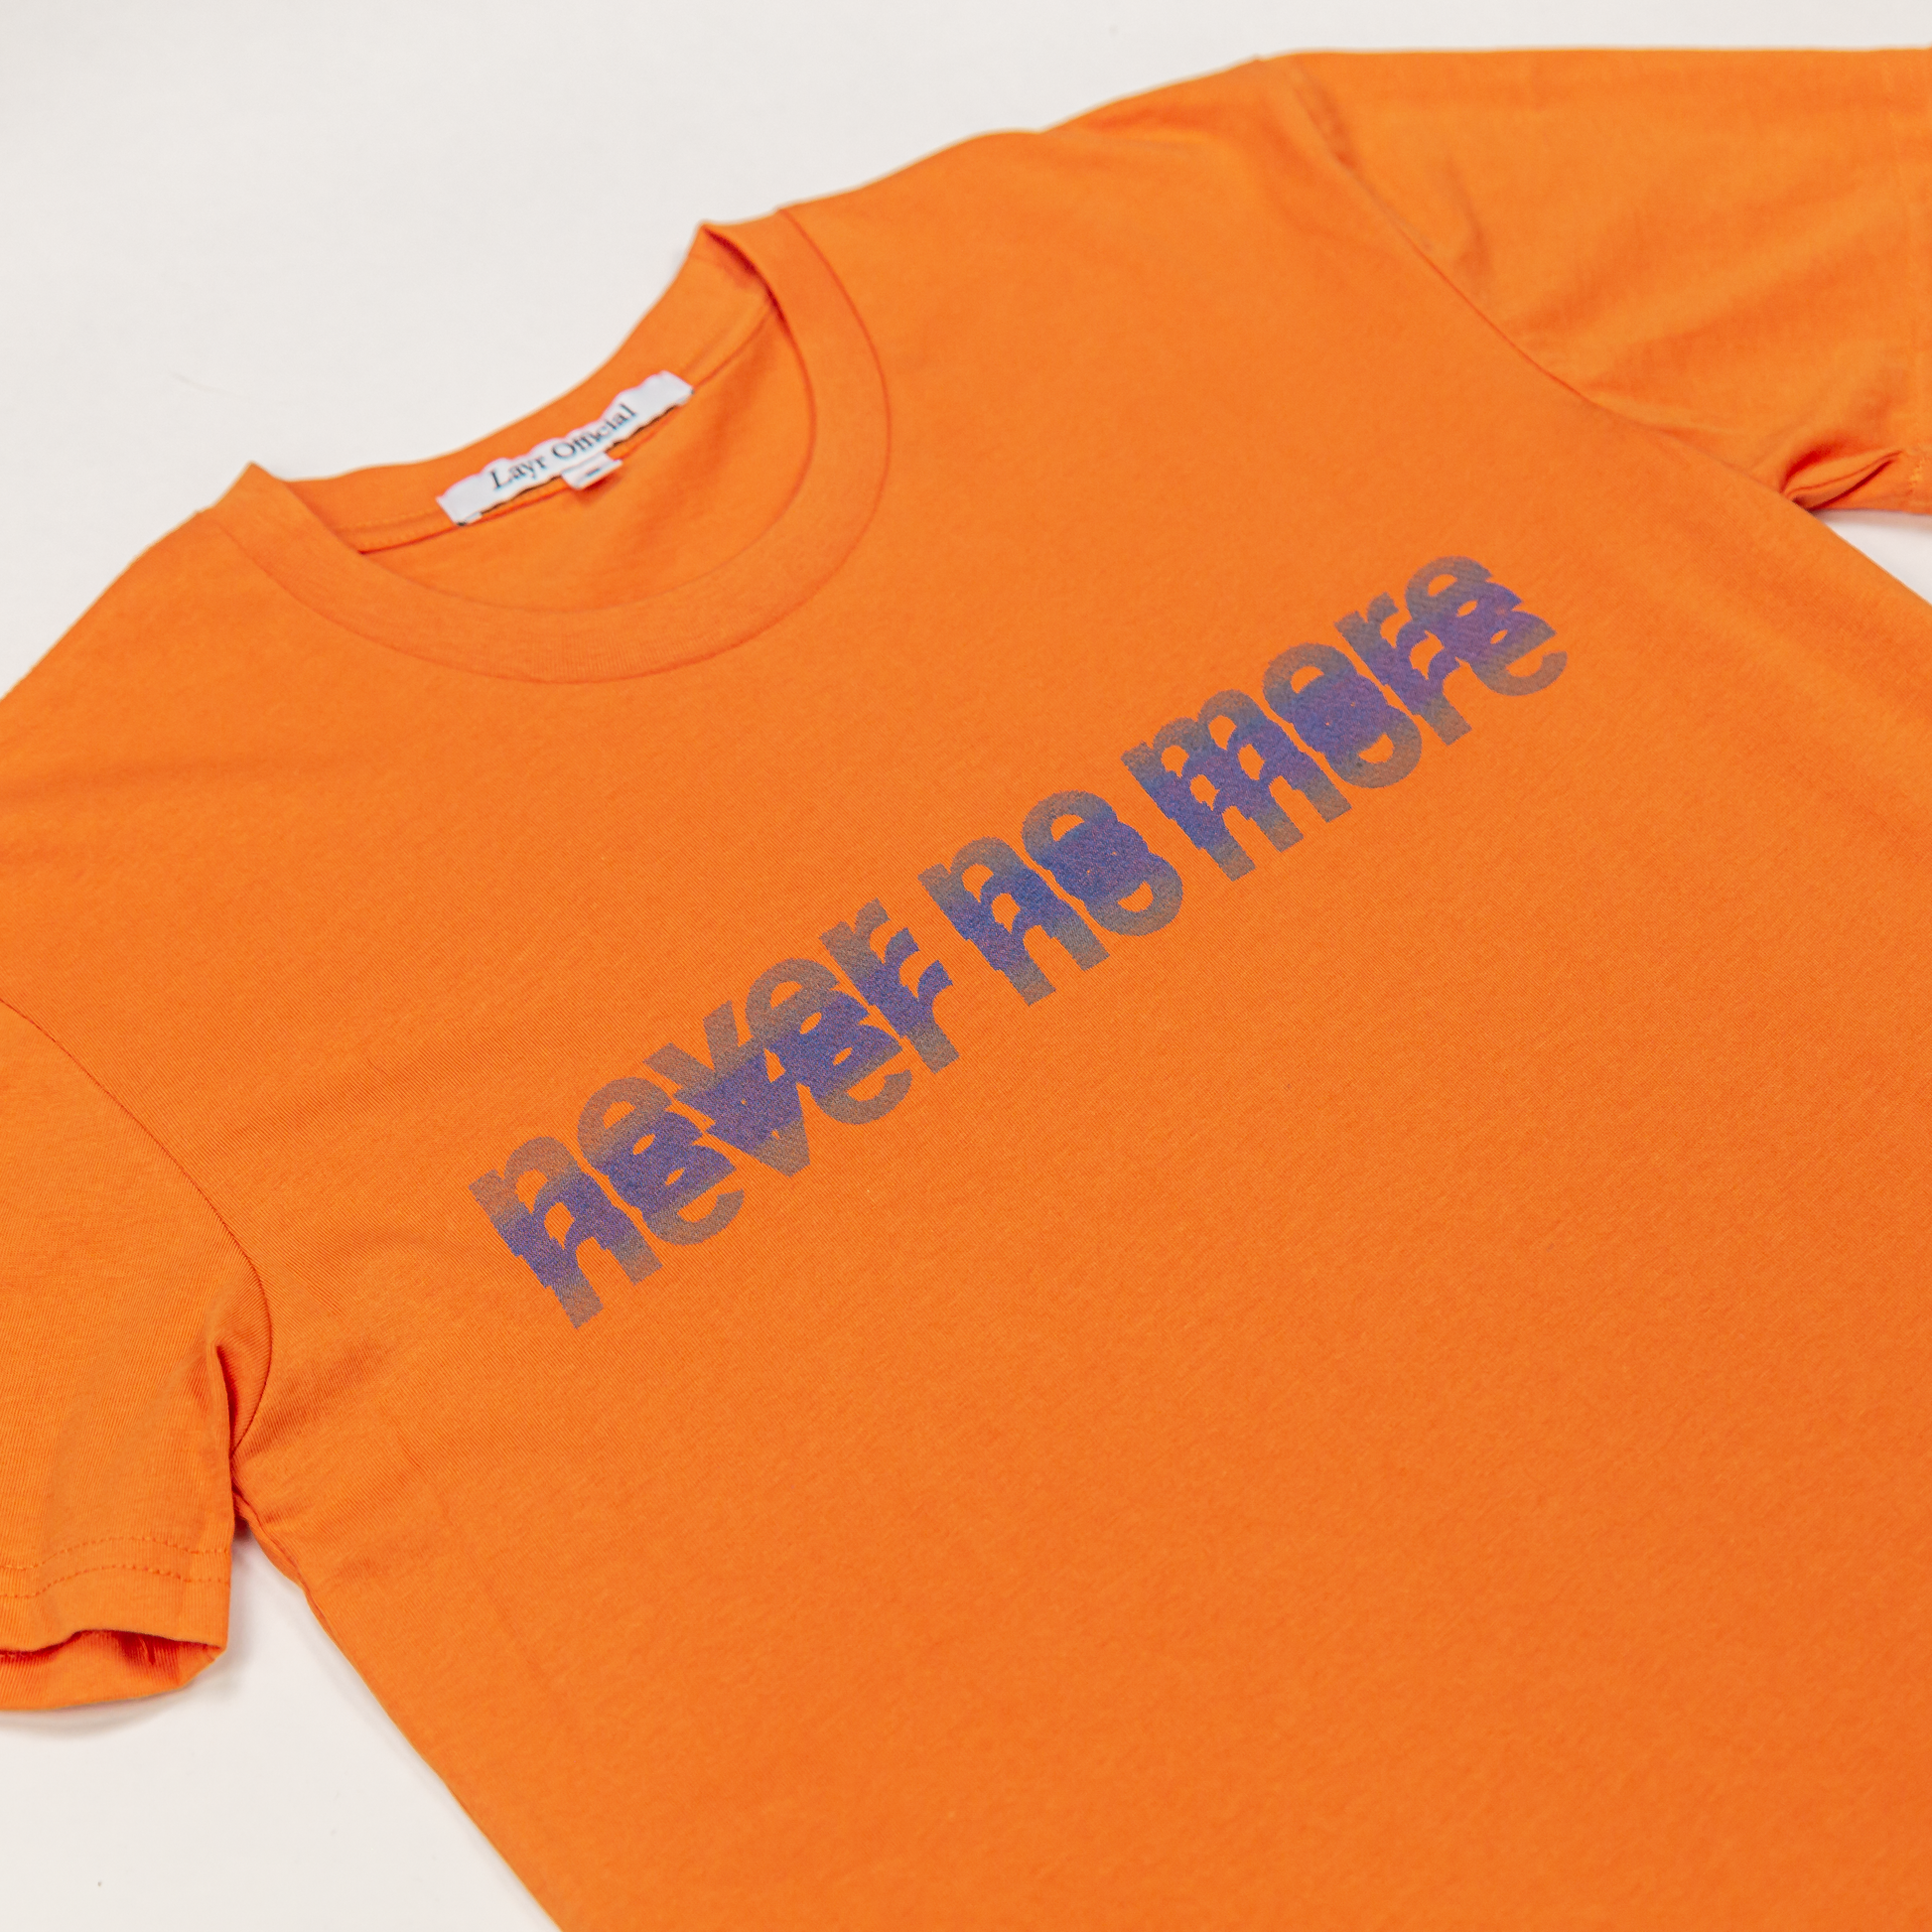 Tripple Never No More Tee, Orange/Royal - Layr Official